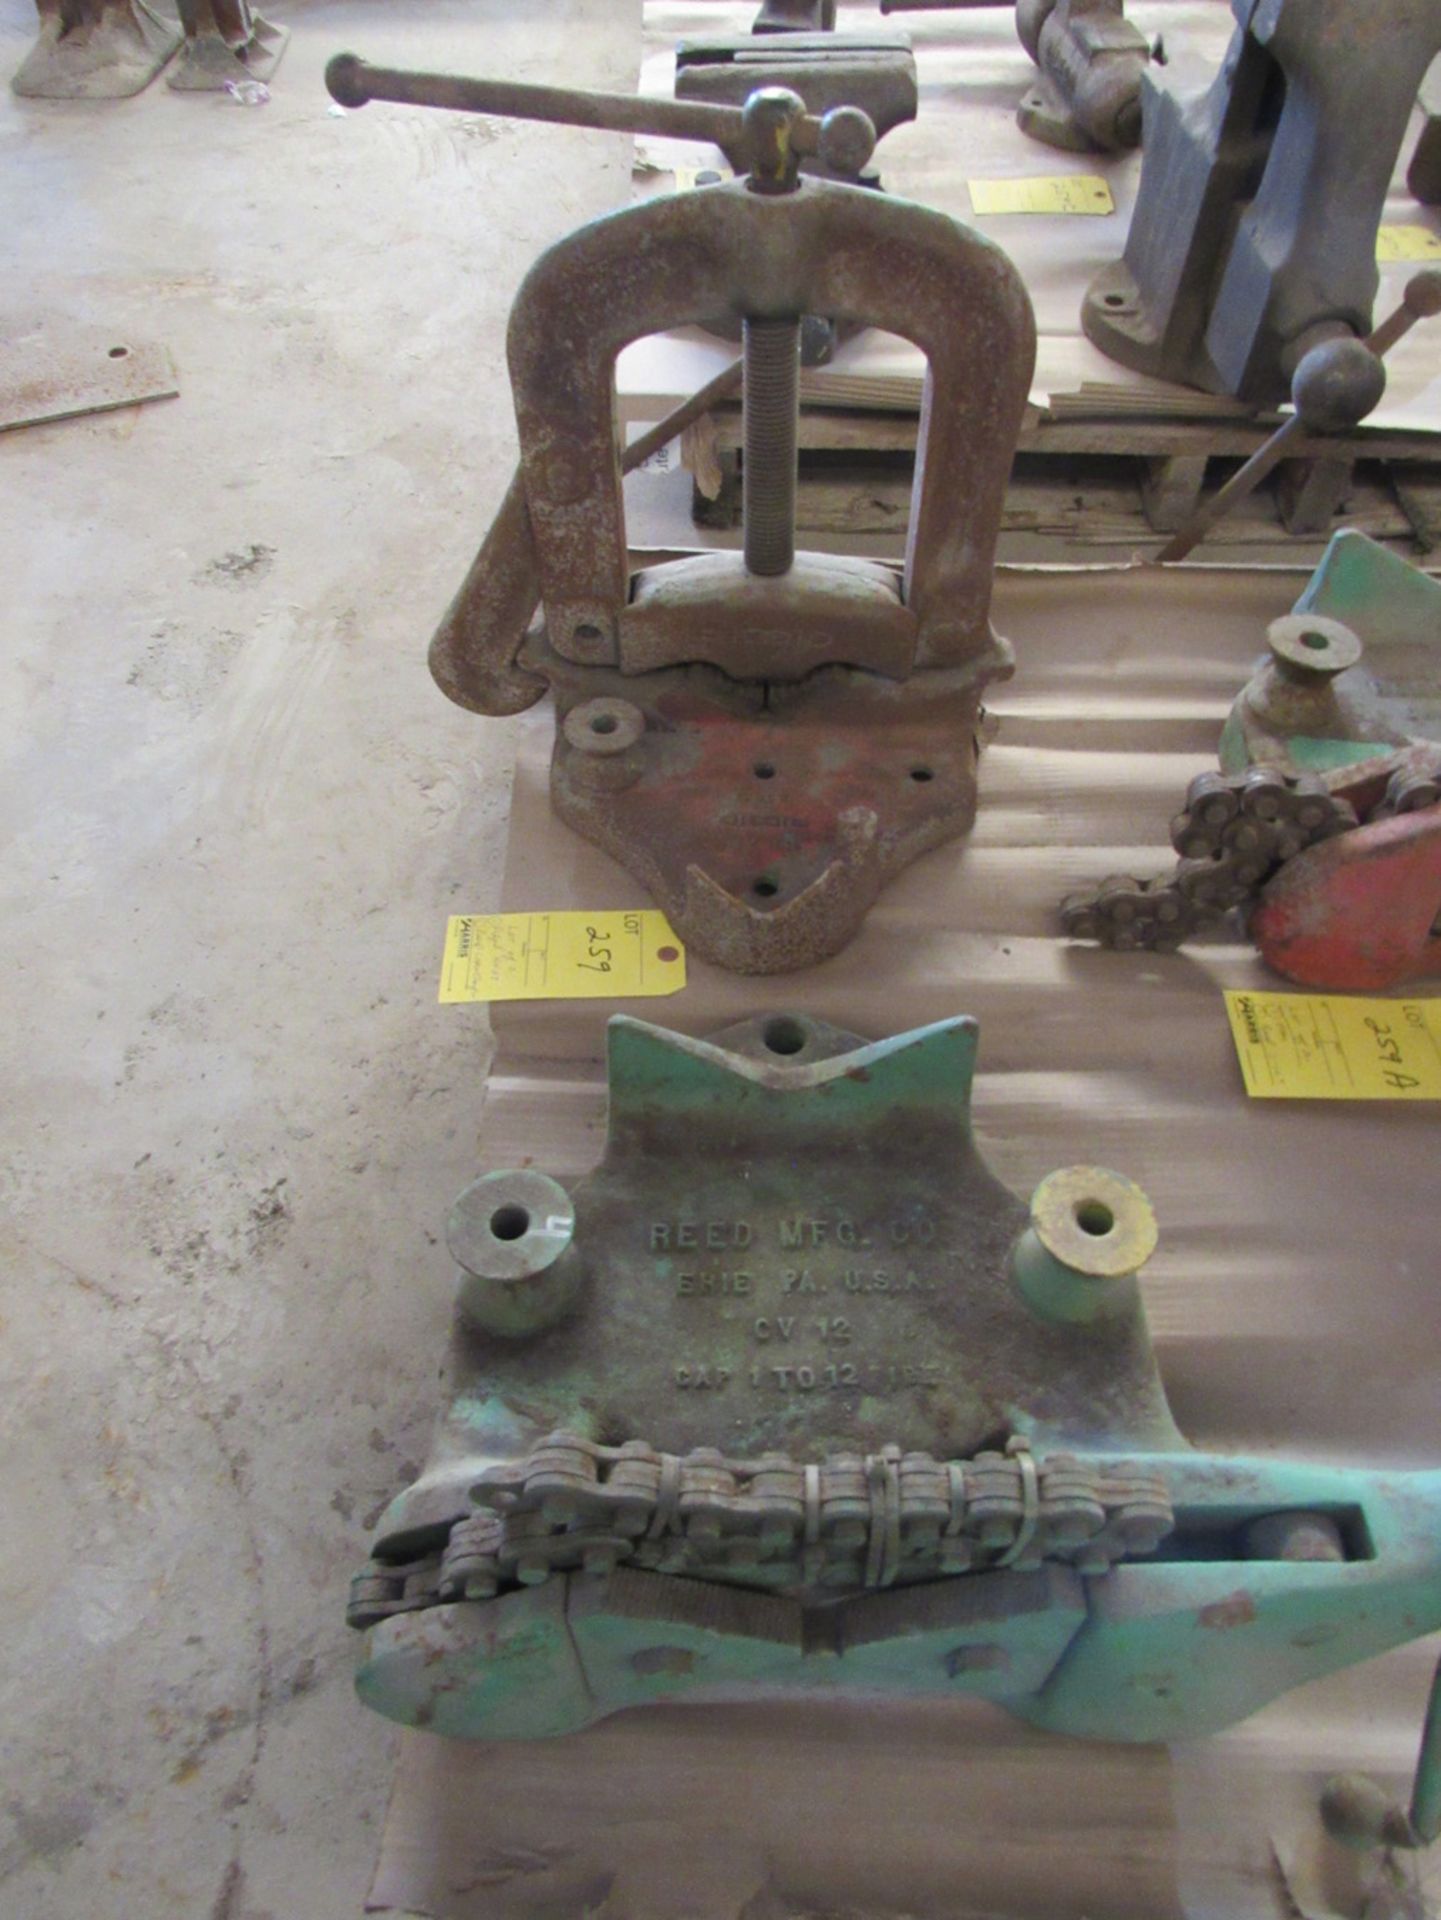 Lot of 2 Pipe Vises - Image 2 of 4